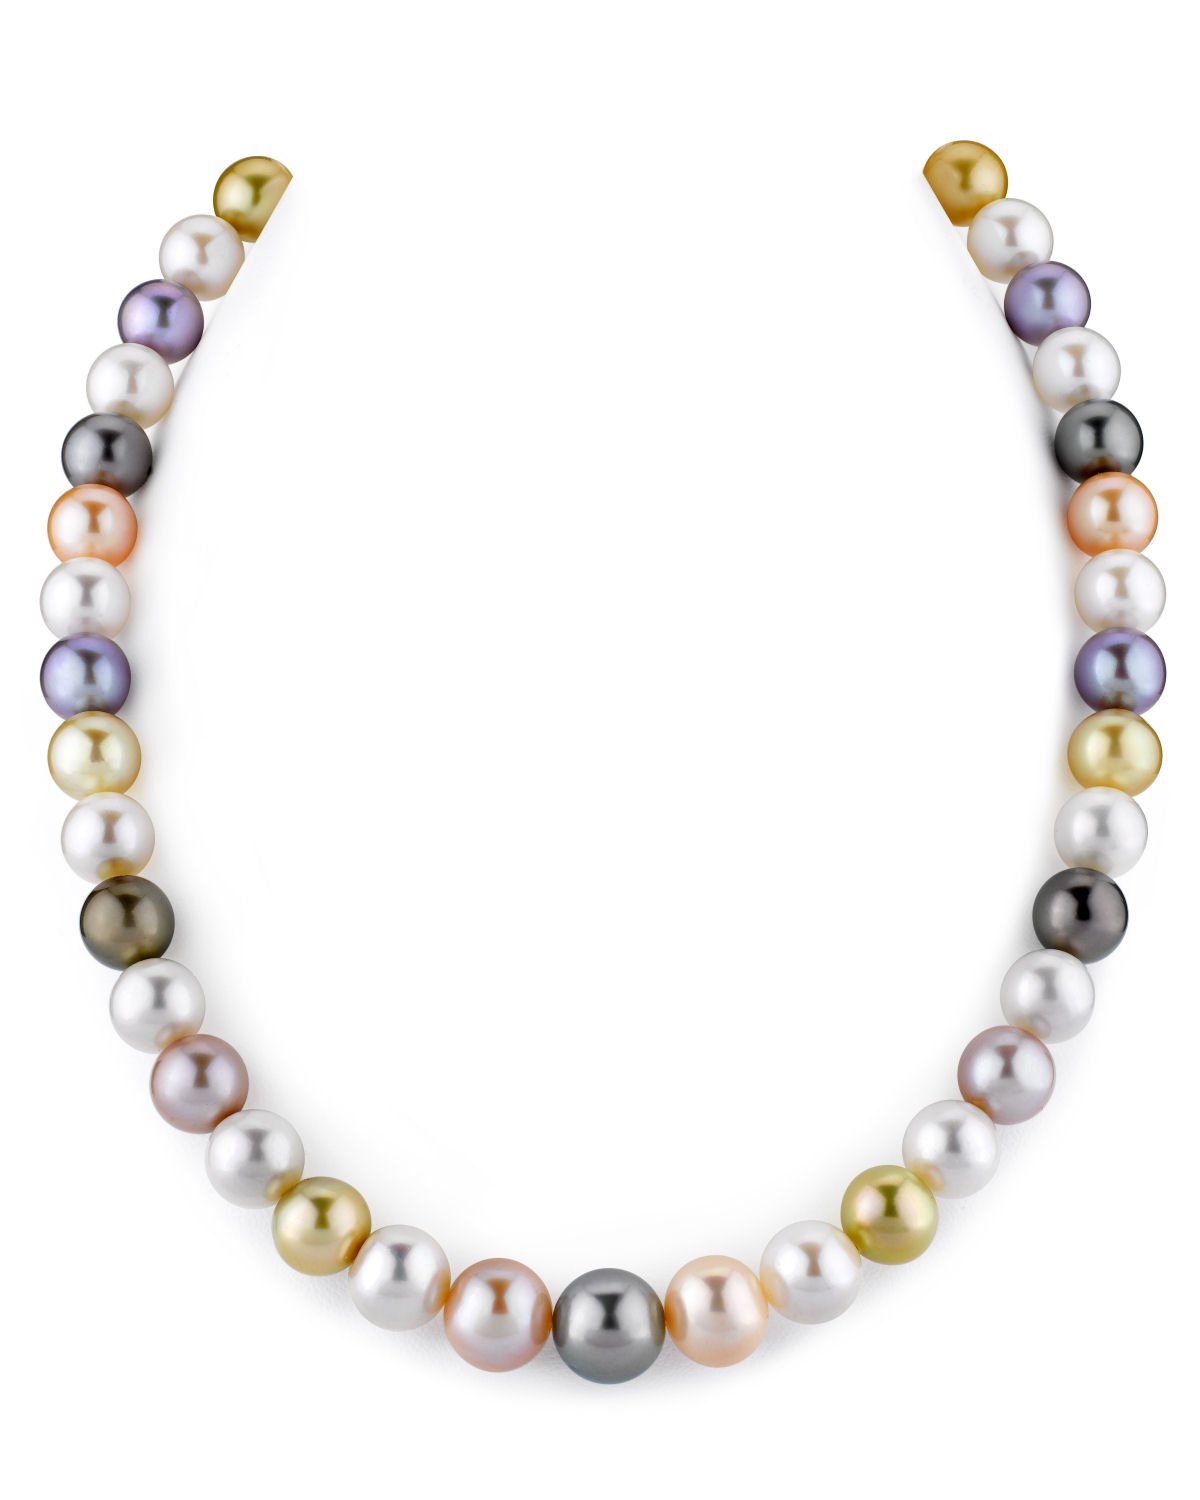 Multi-Color Tahitian, South Sea & Freshwater Pearl Necklace, 9.0-11.0mm - AAA Quality 18 Princess Length / Ball Magnetic Clasp - Sterling Silver